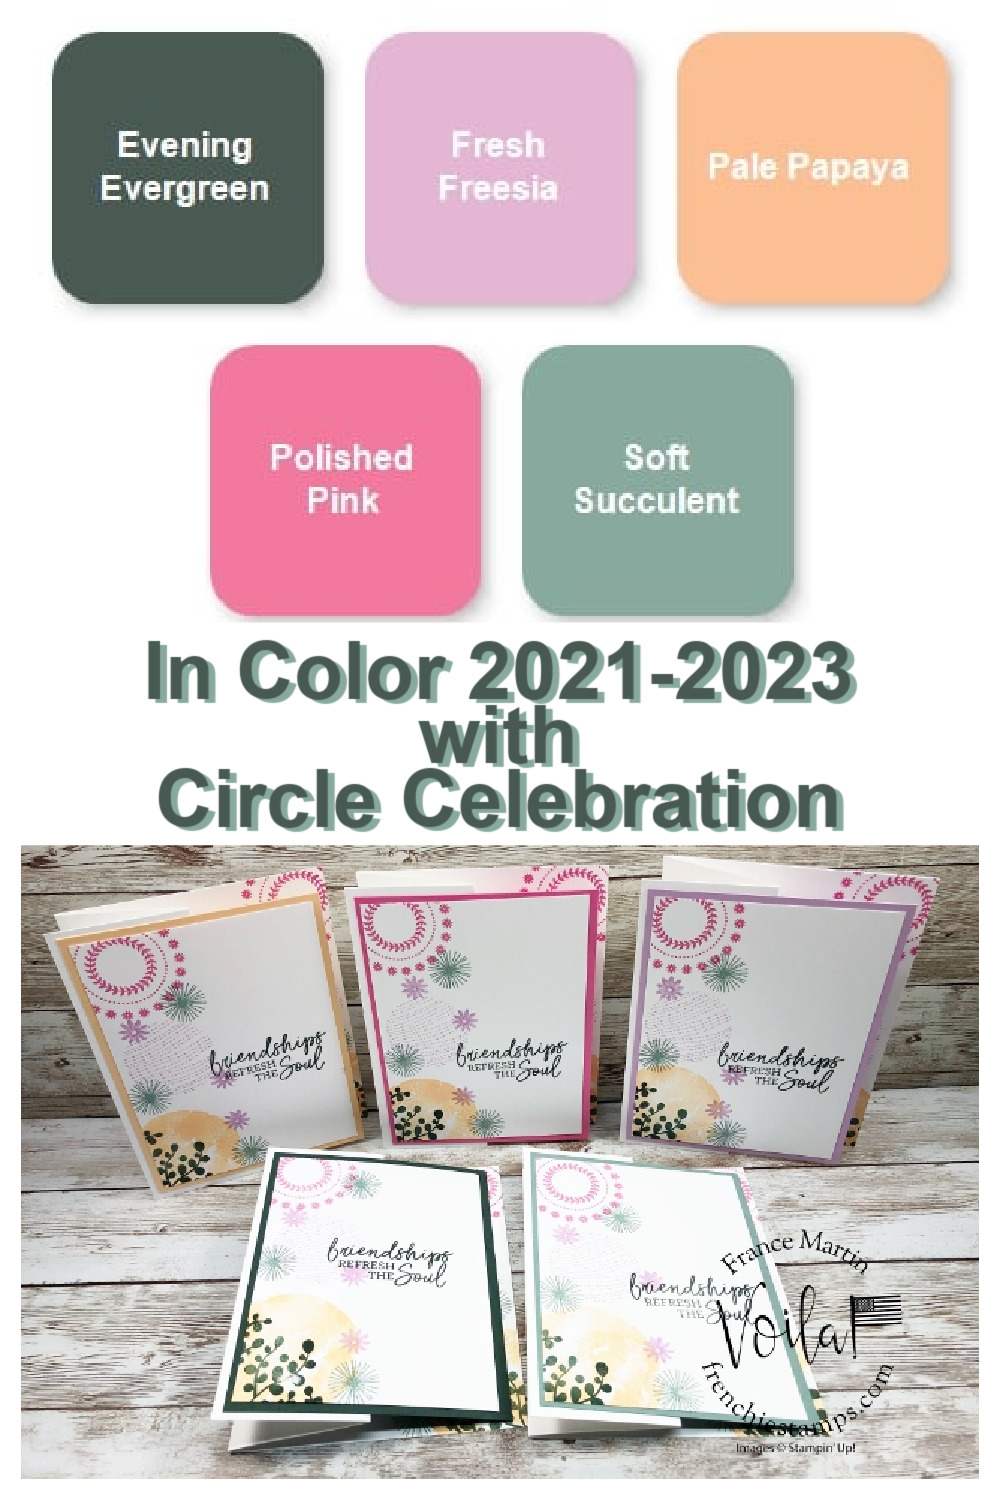 In-Colors 2021-2023 with circle Celebration